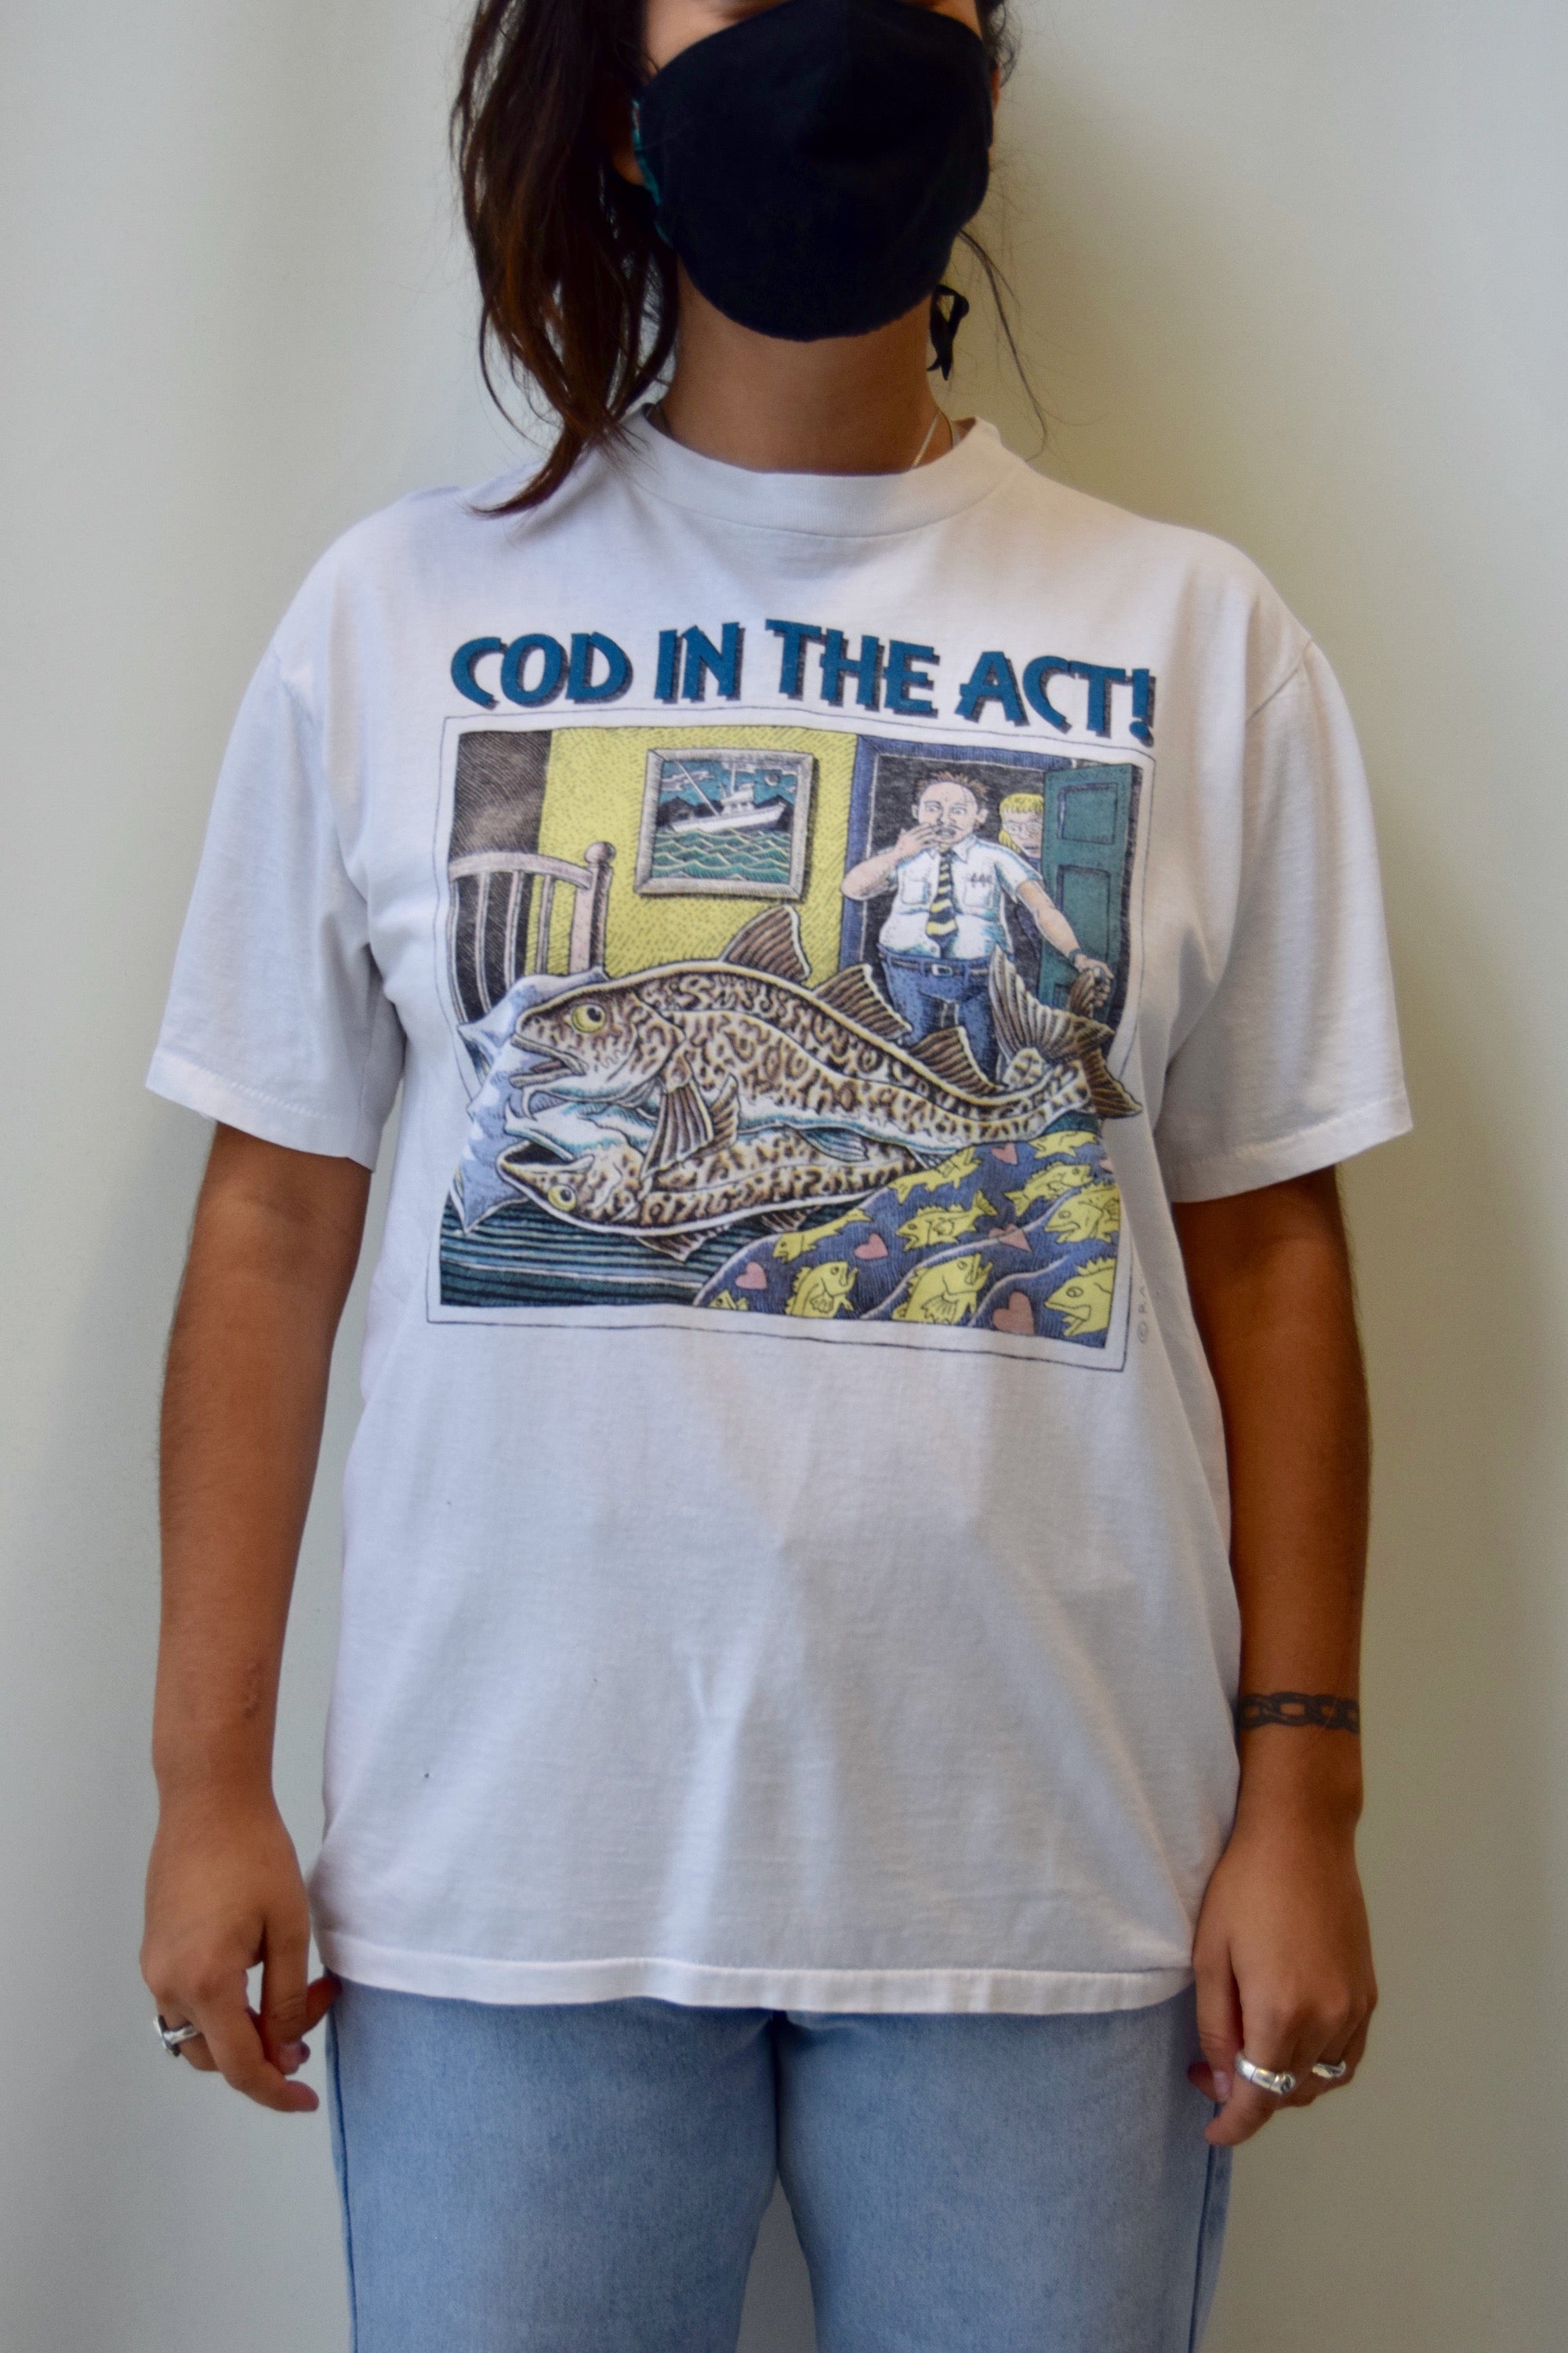 1996 Ray Troll "Cod In The Act" Tee